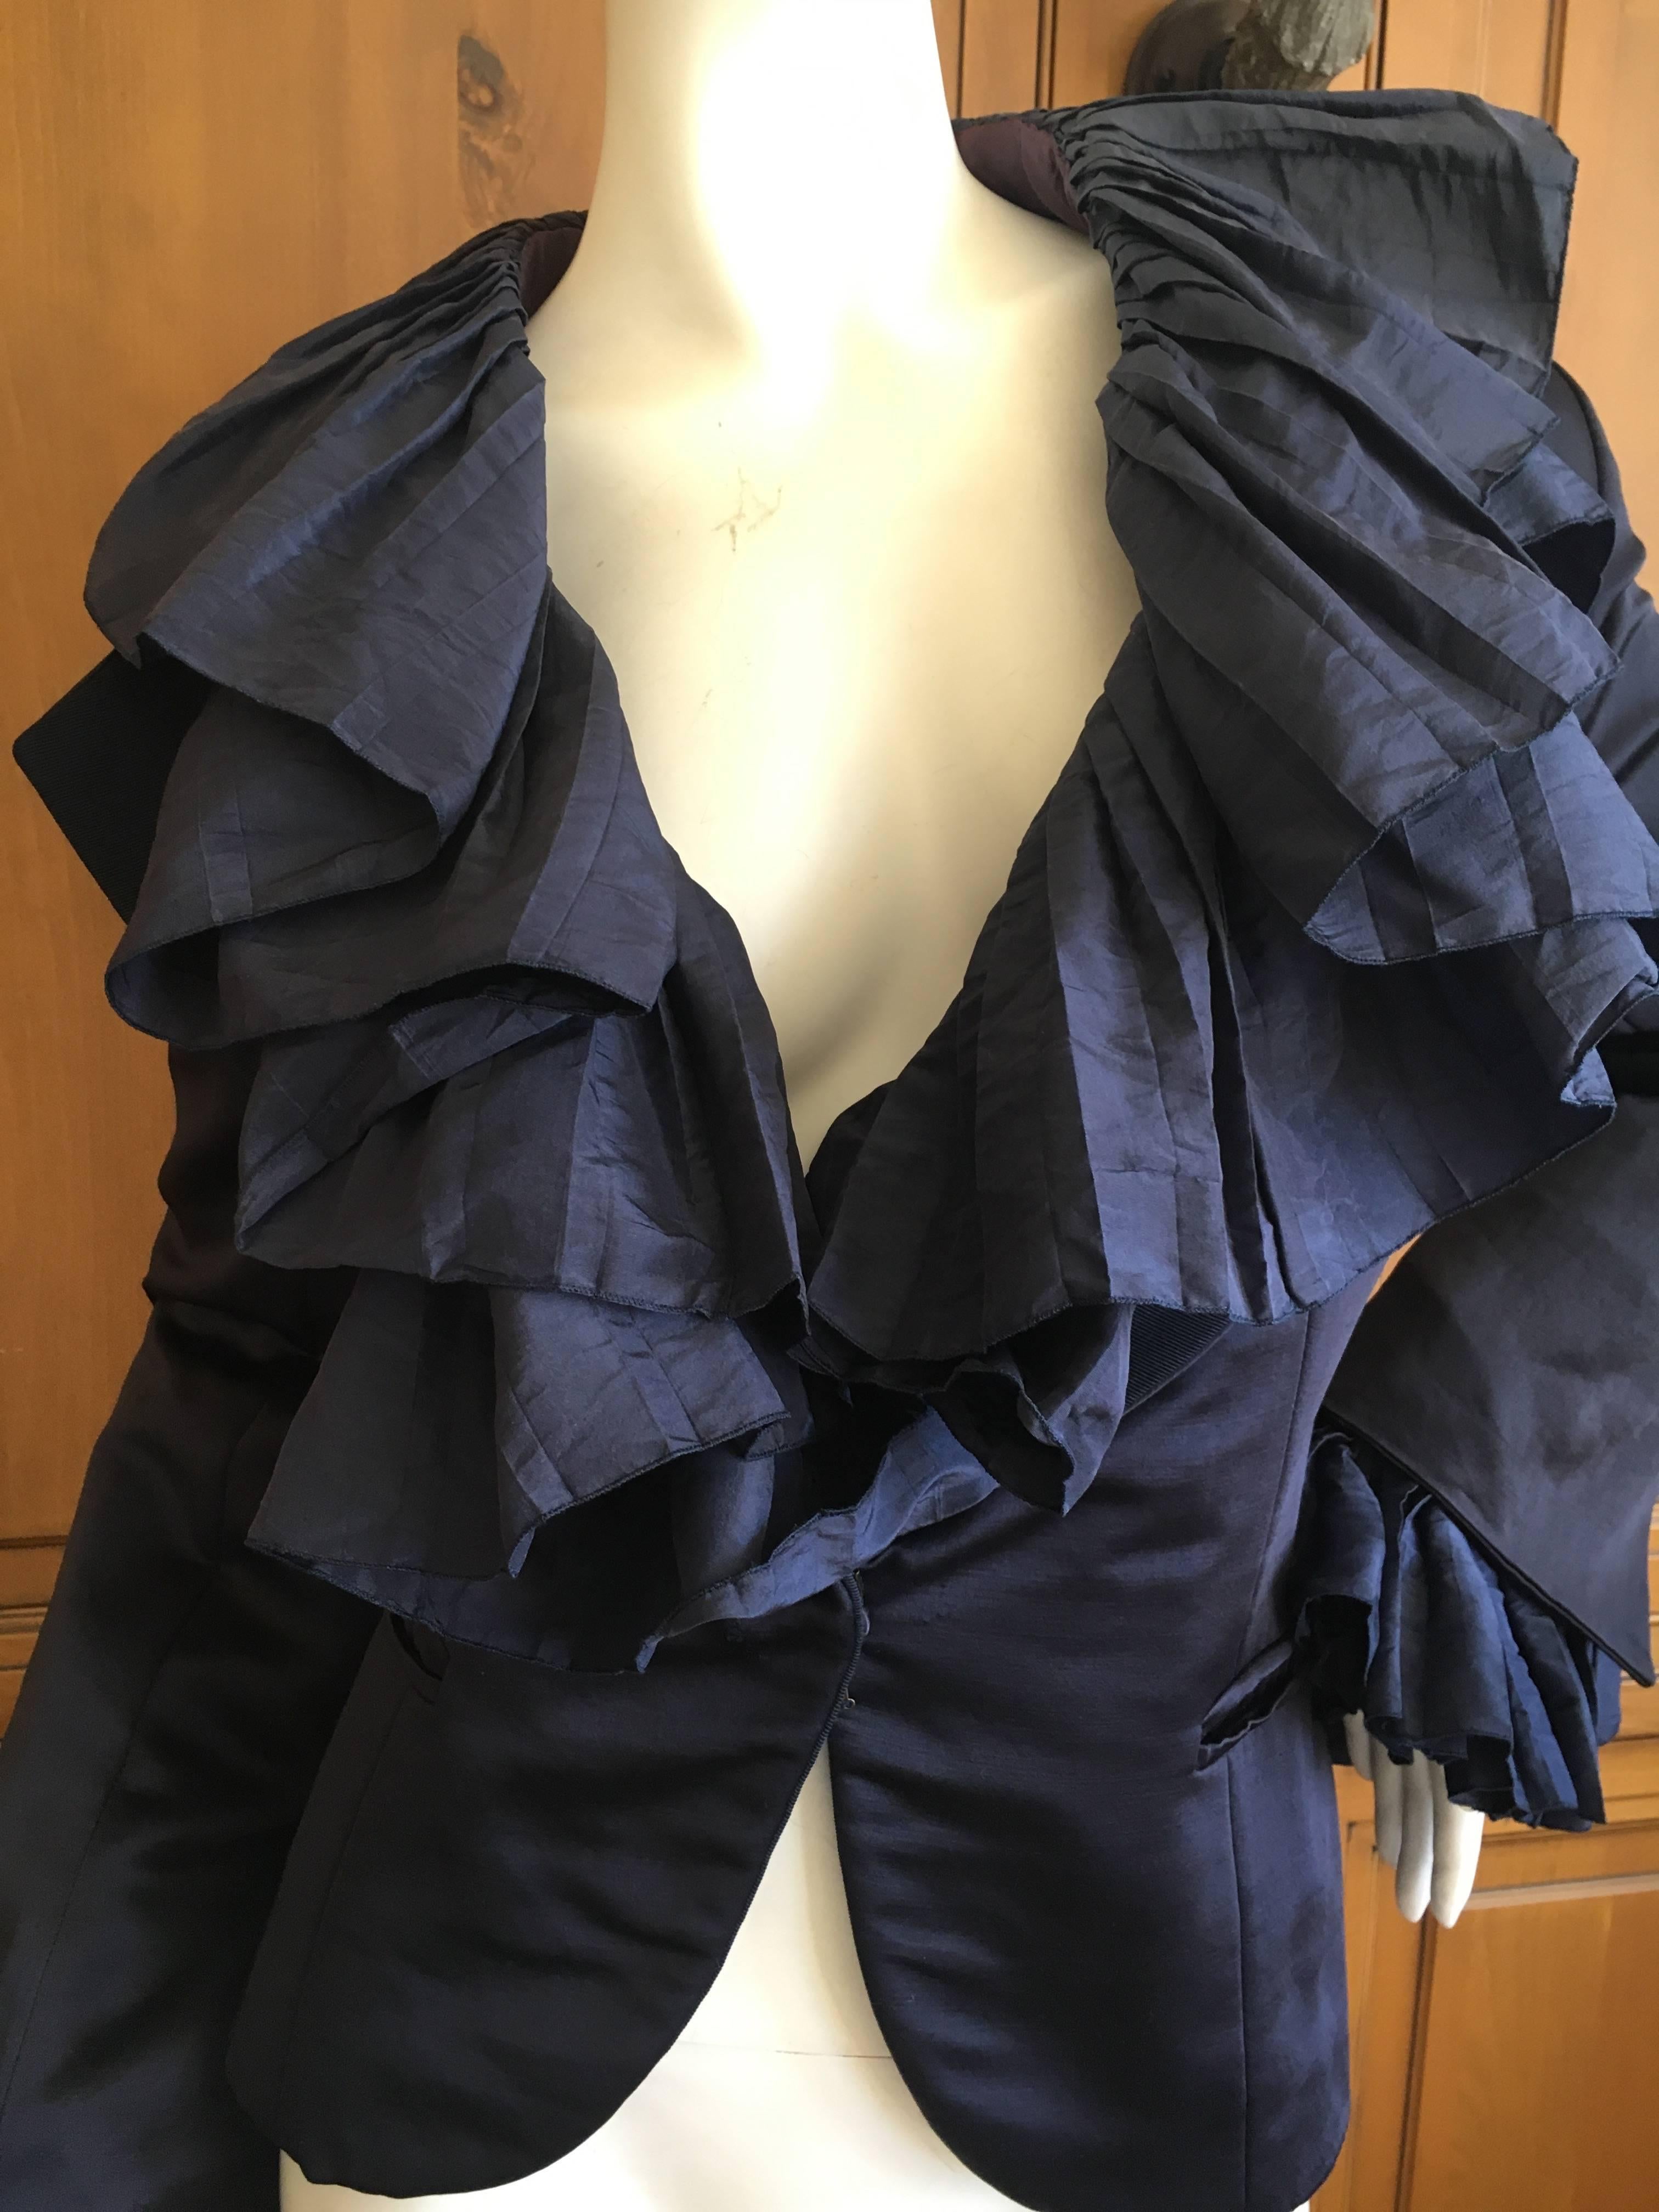 Christian Dior Numbered Demi Couture Ruffled Silk Jacket by Gianfranco Ferre XL For Sale 1